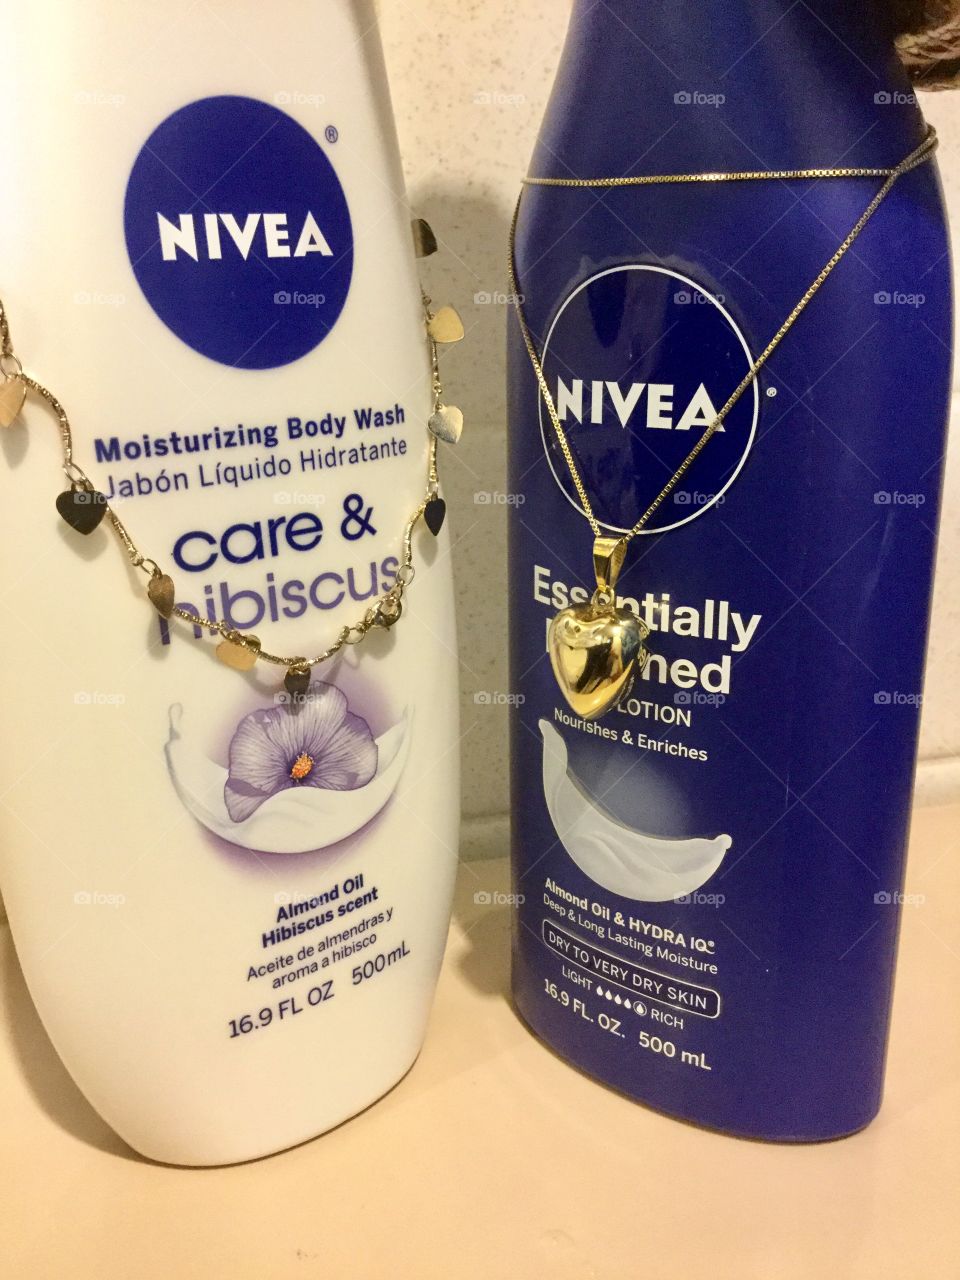 In Love with Nivea 